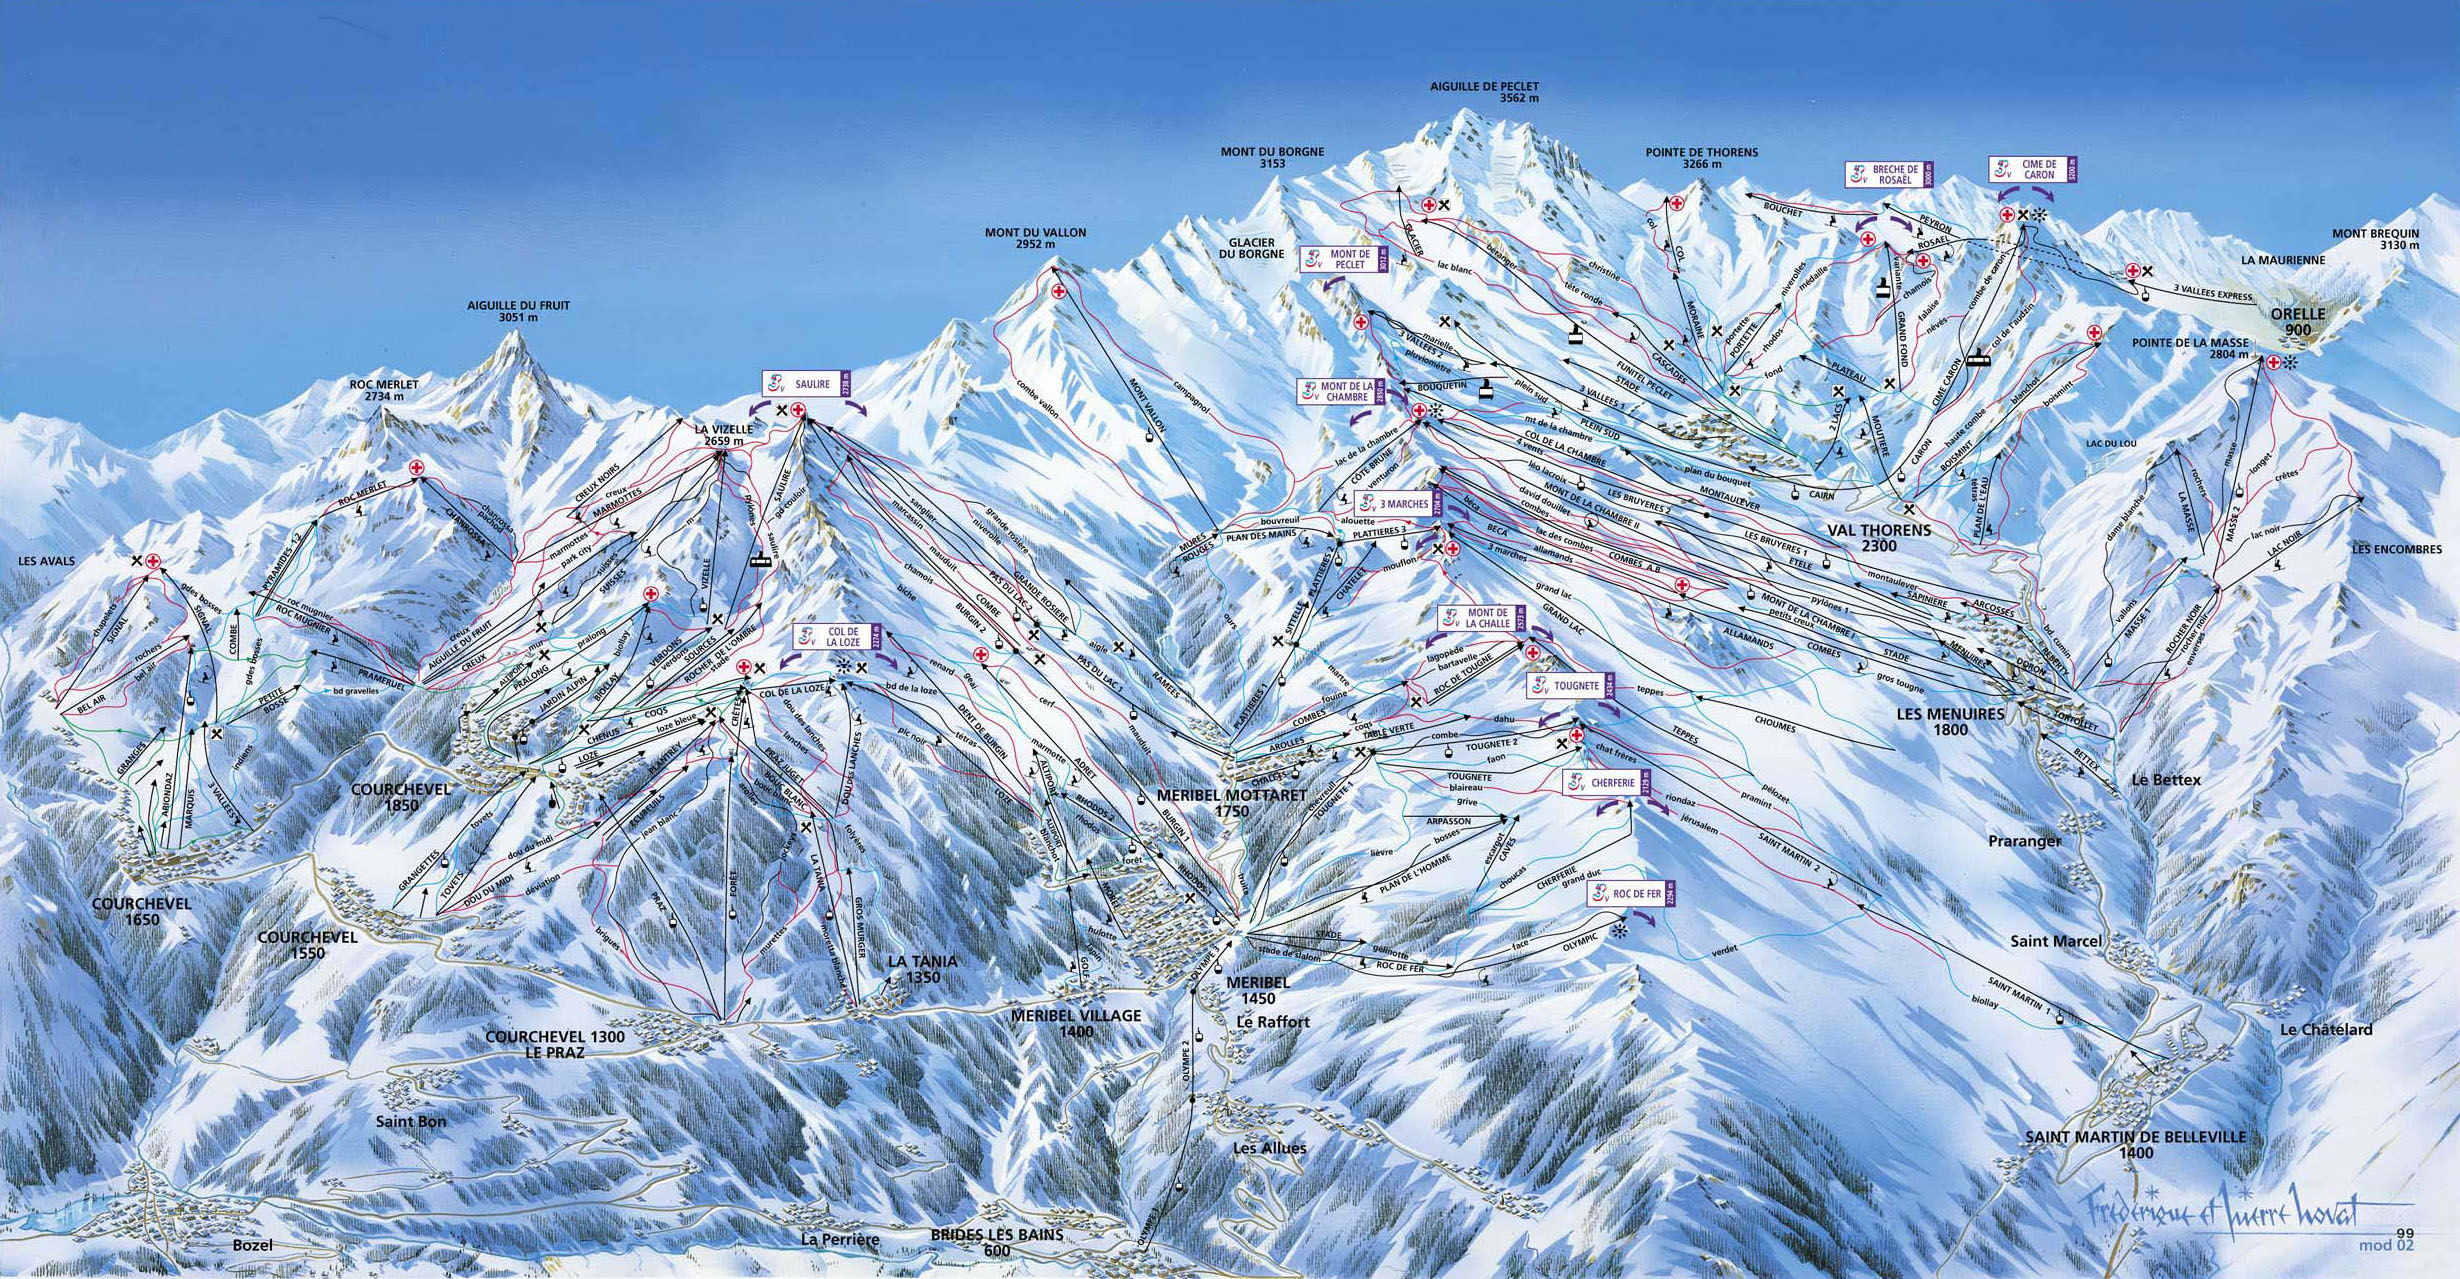 Les Trois Vallee, the largest ski resort on Earth. 